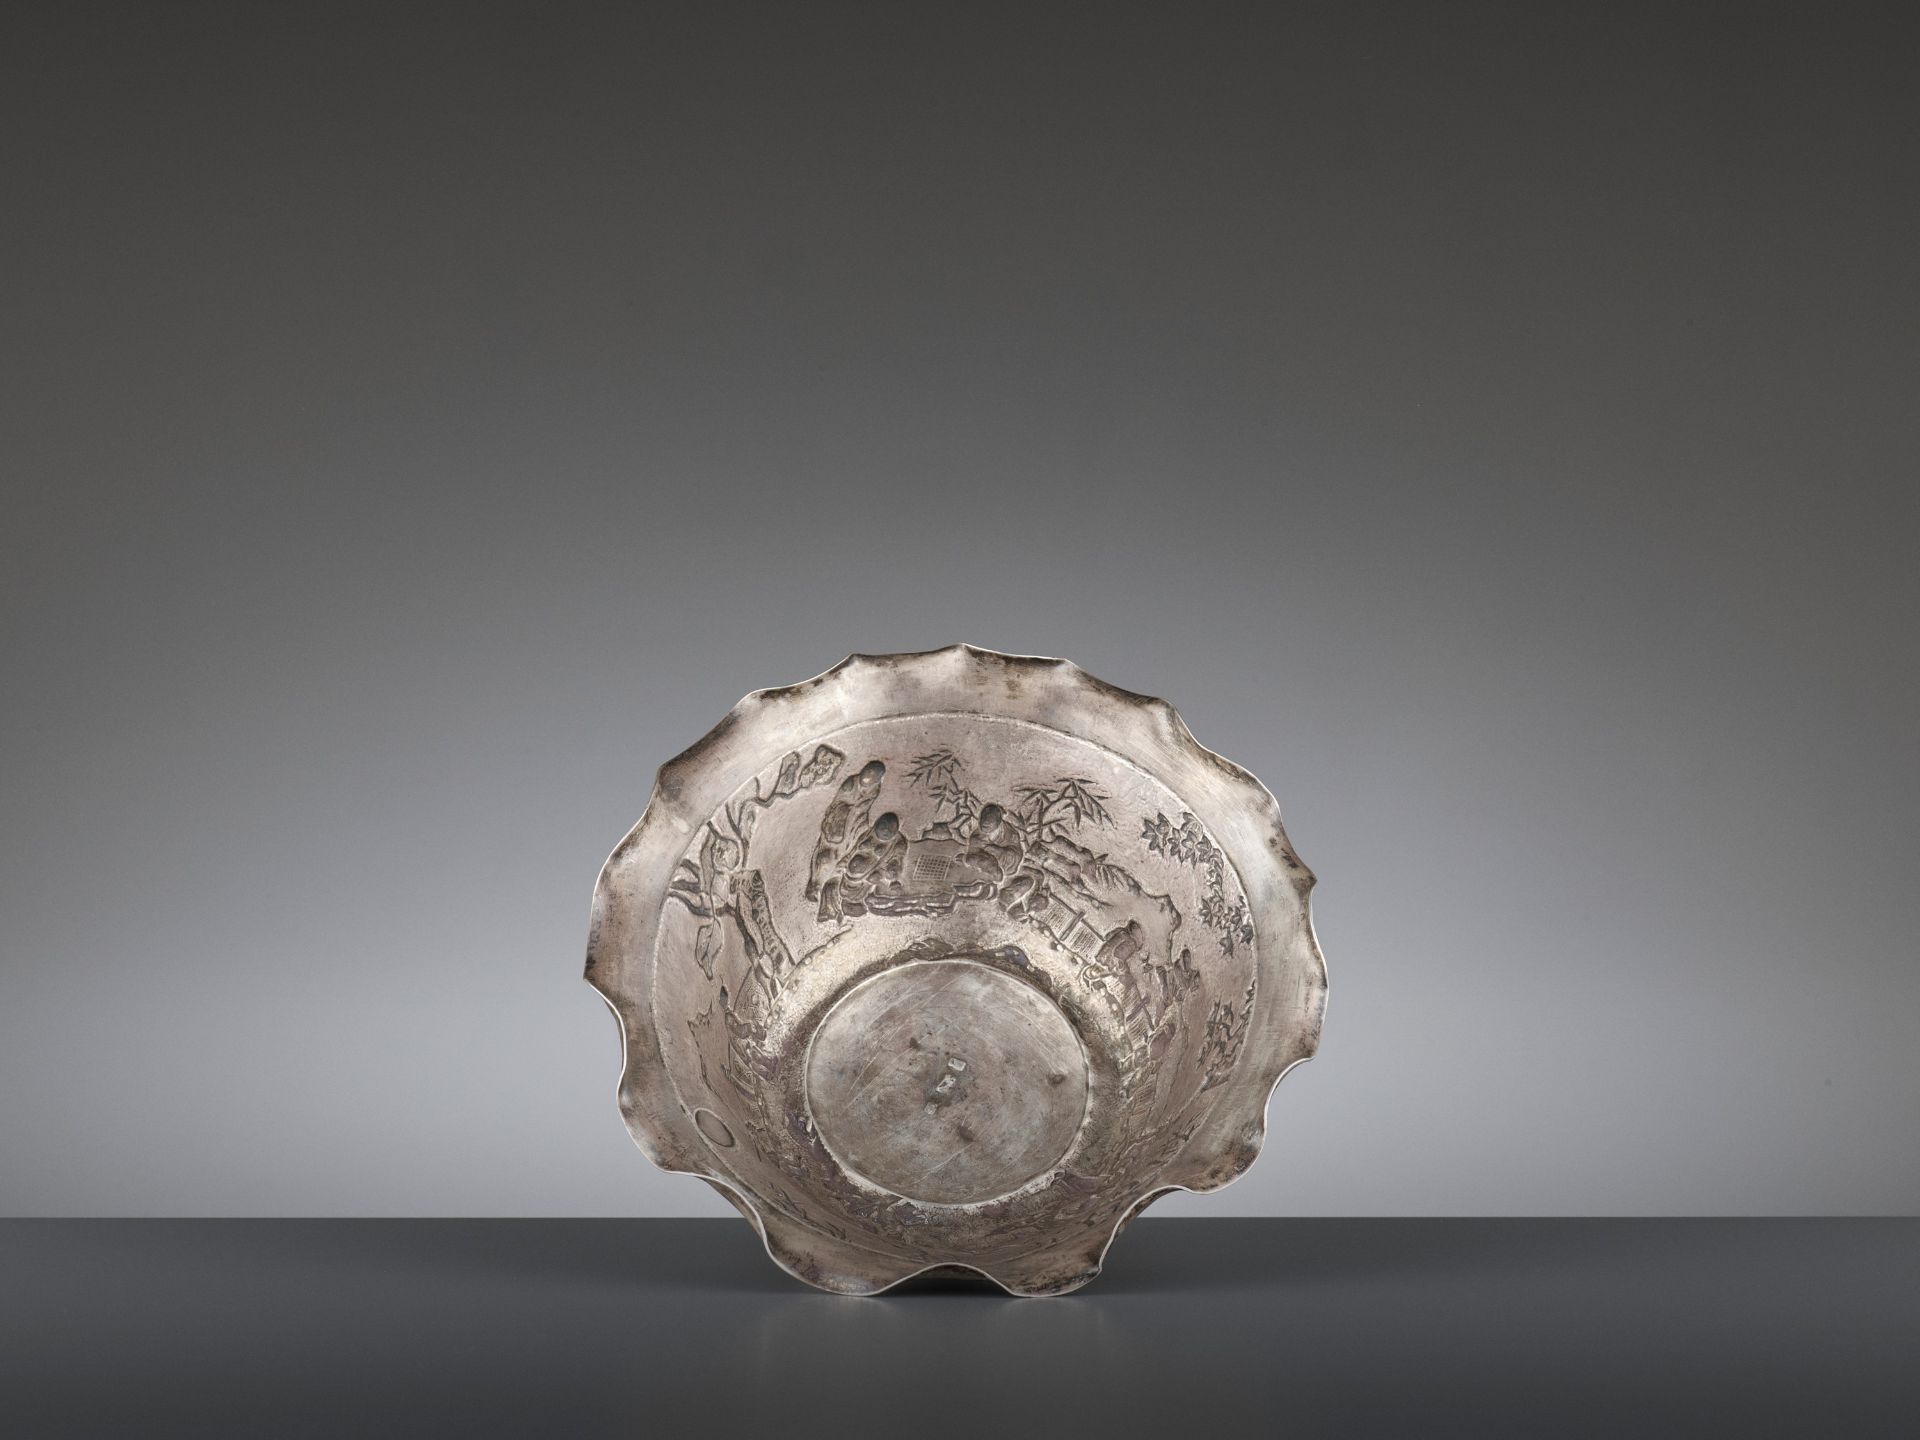 A SILVER REPOUSSE 'WEIQI PLAYERS' BOWL BY KWONG MAN SHING - Image 9 of 9